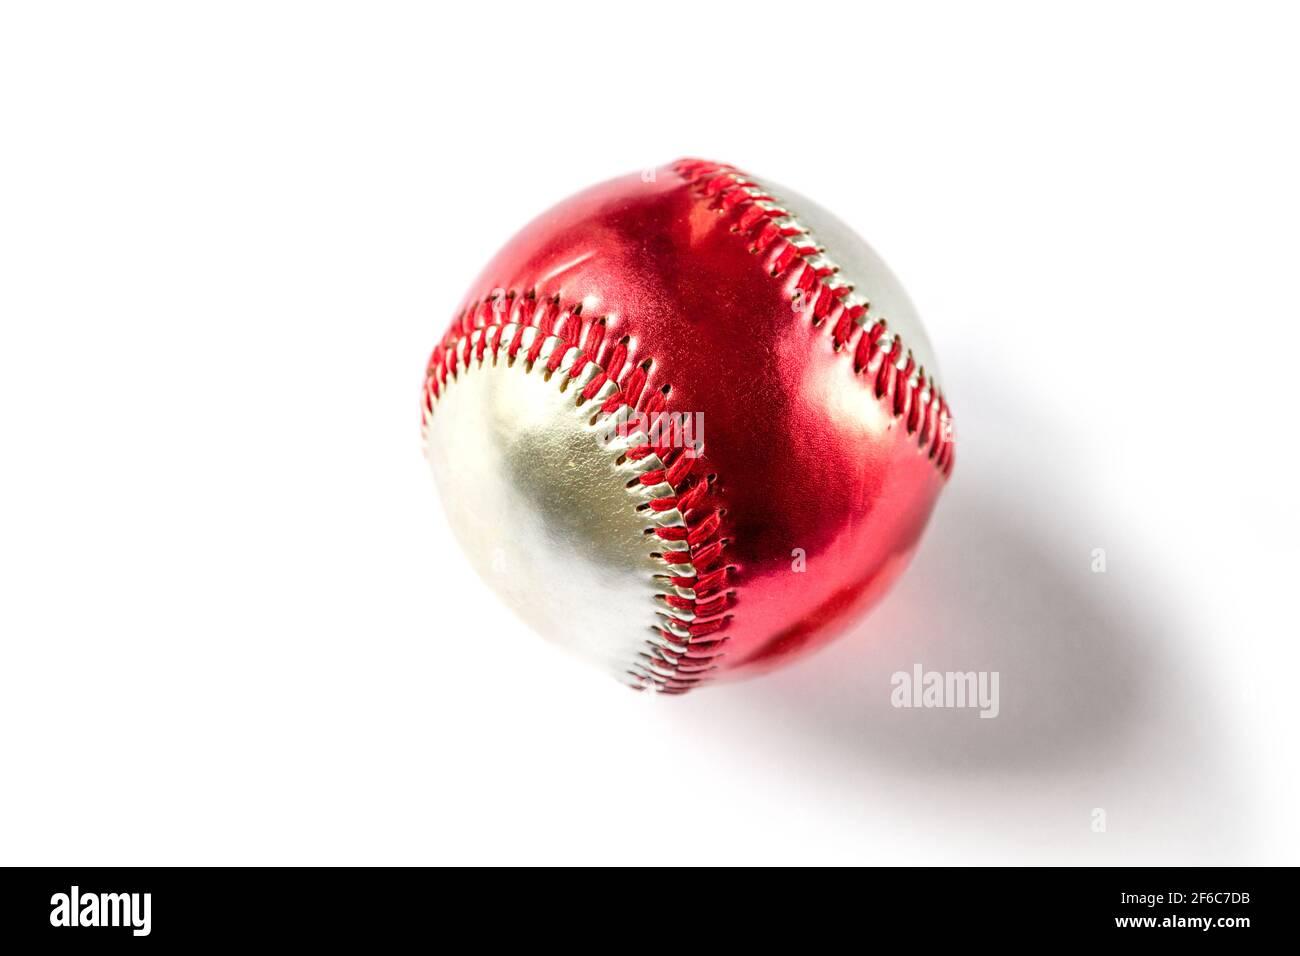 Baseball ball isolated Cut Out Stock Images & Pictures - Page 2